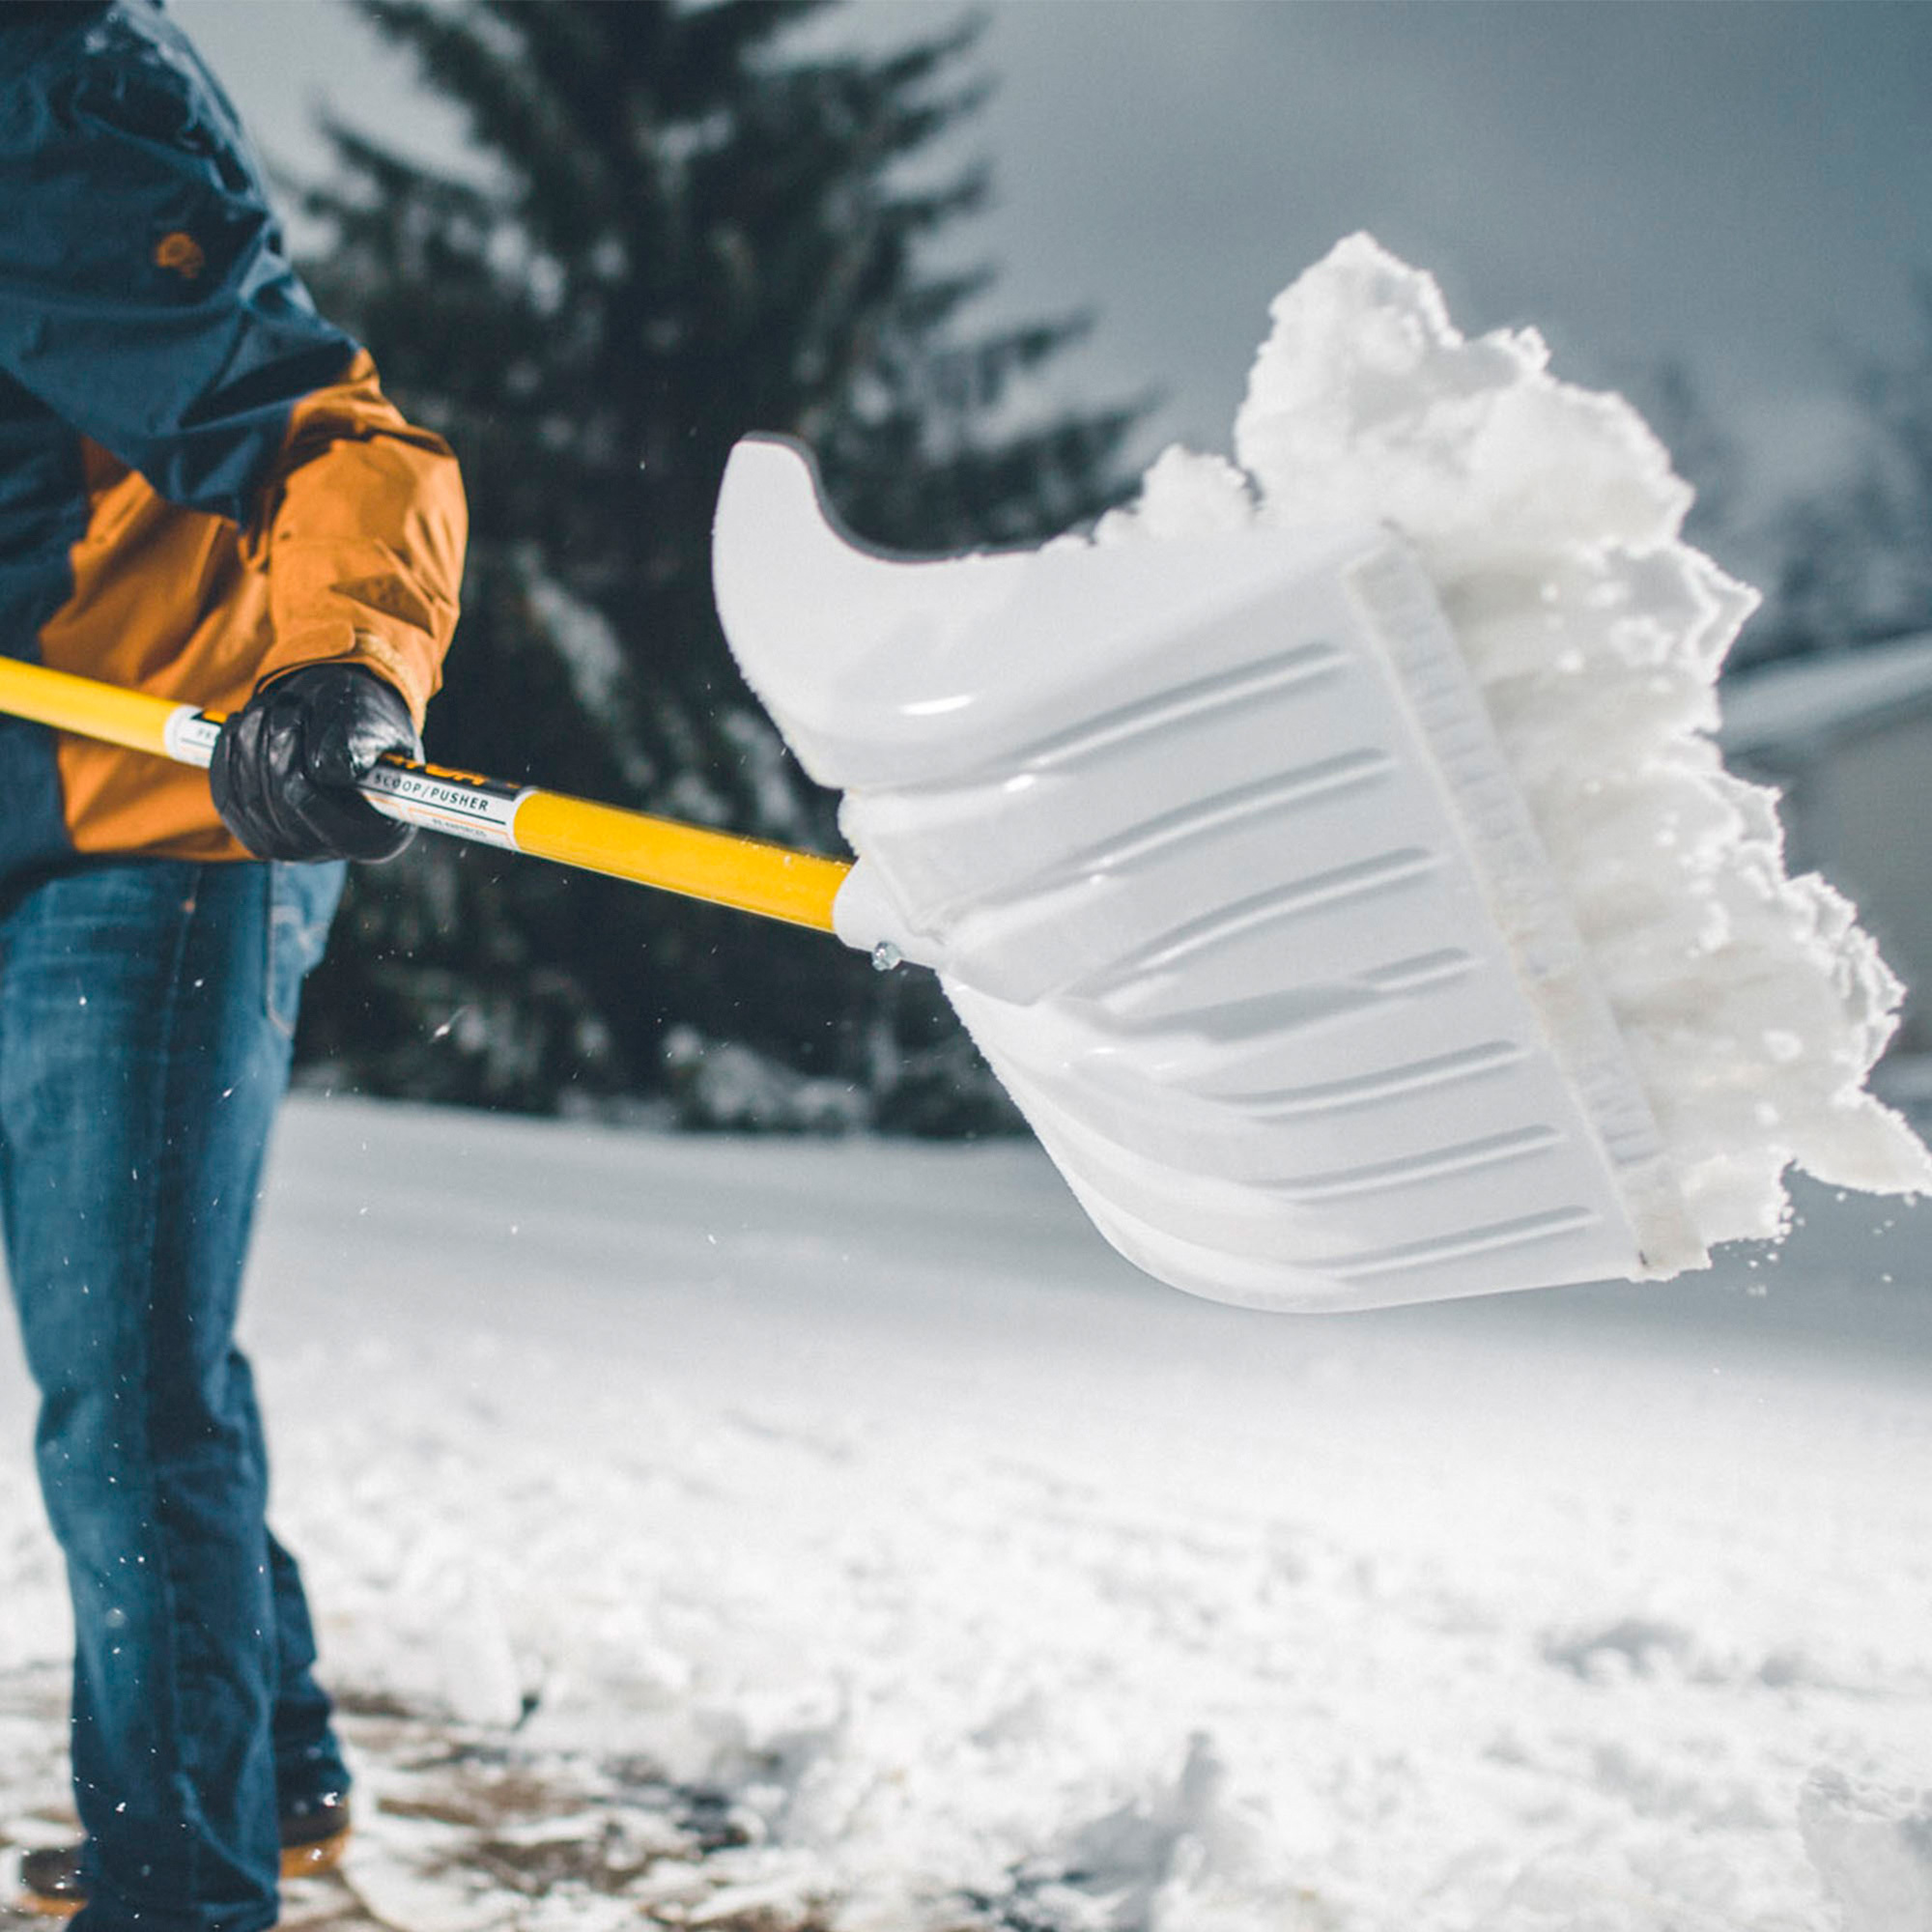 Here's the scoop on devices that ease burden of snow removal